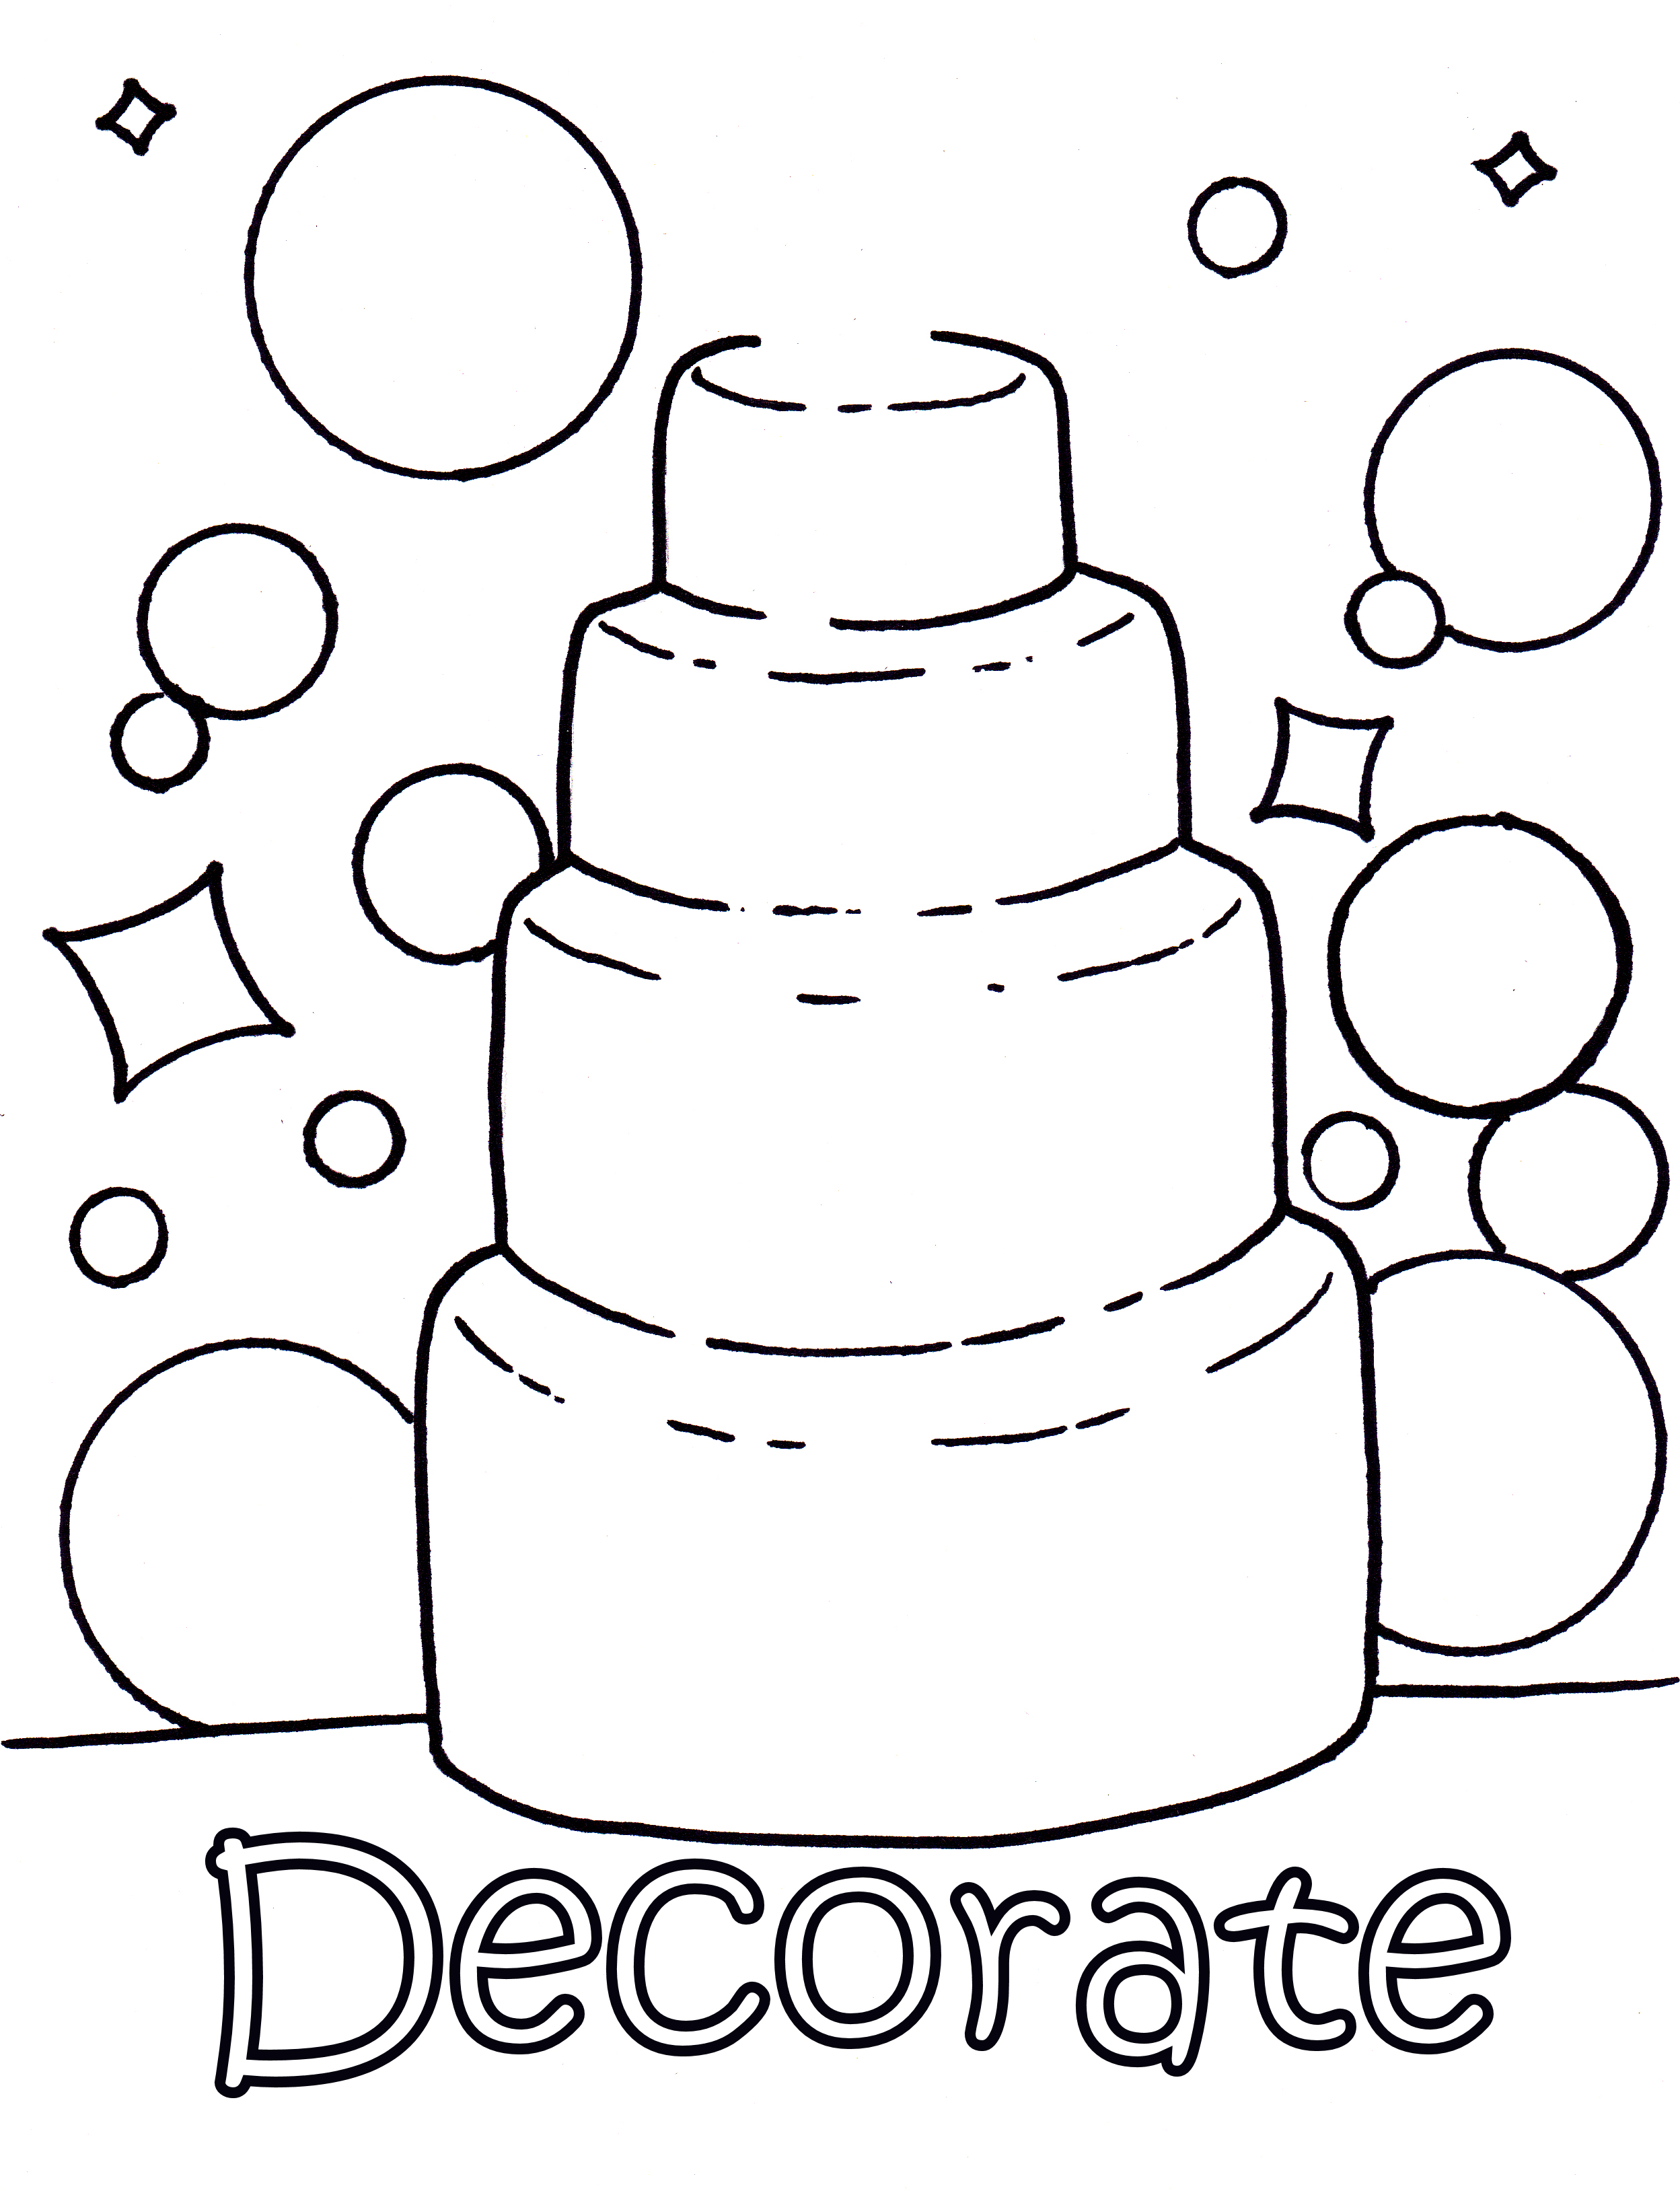 Rare Wedding Coloring Pages Free Www Bpsc Conf Org #15720 - Wedding Coloring Book Free Printable